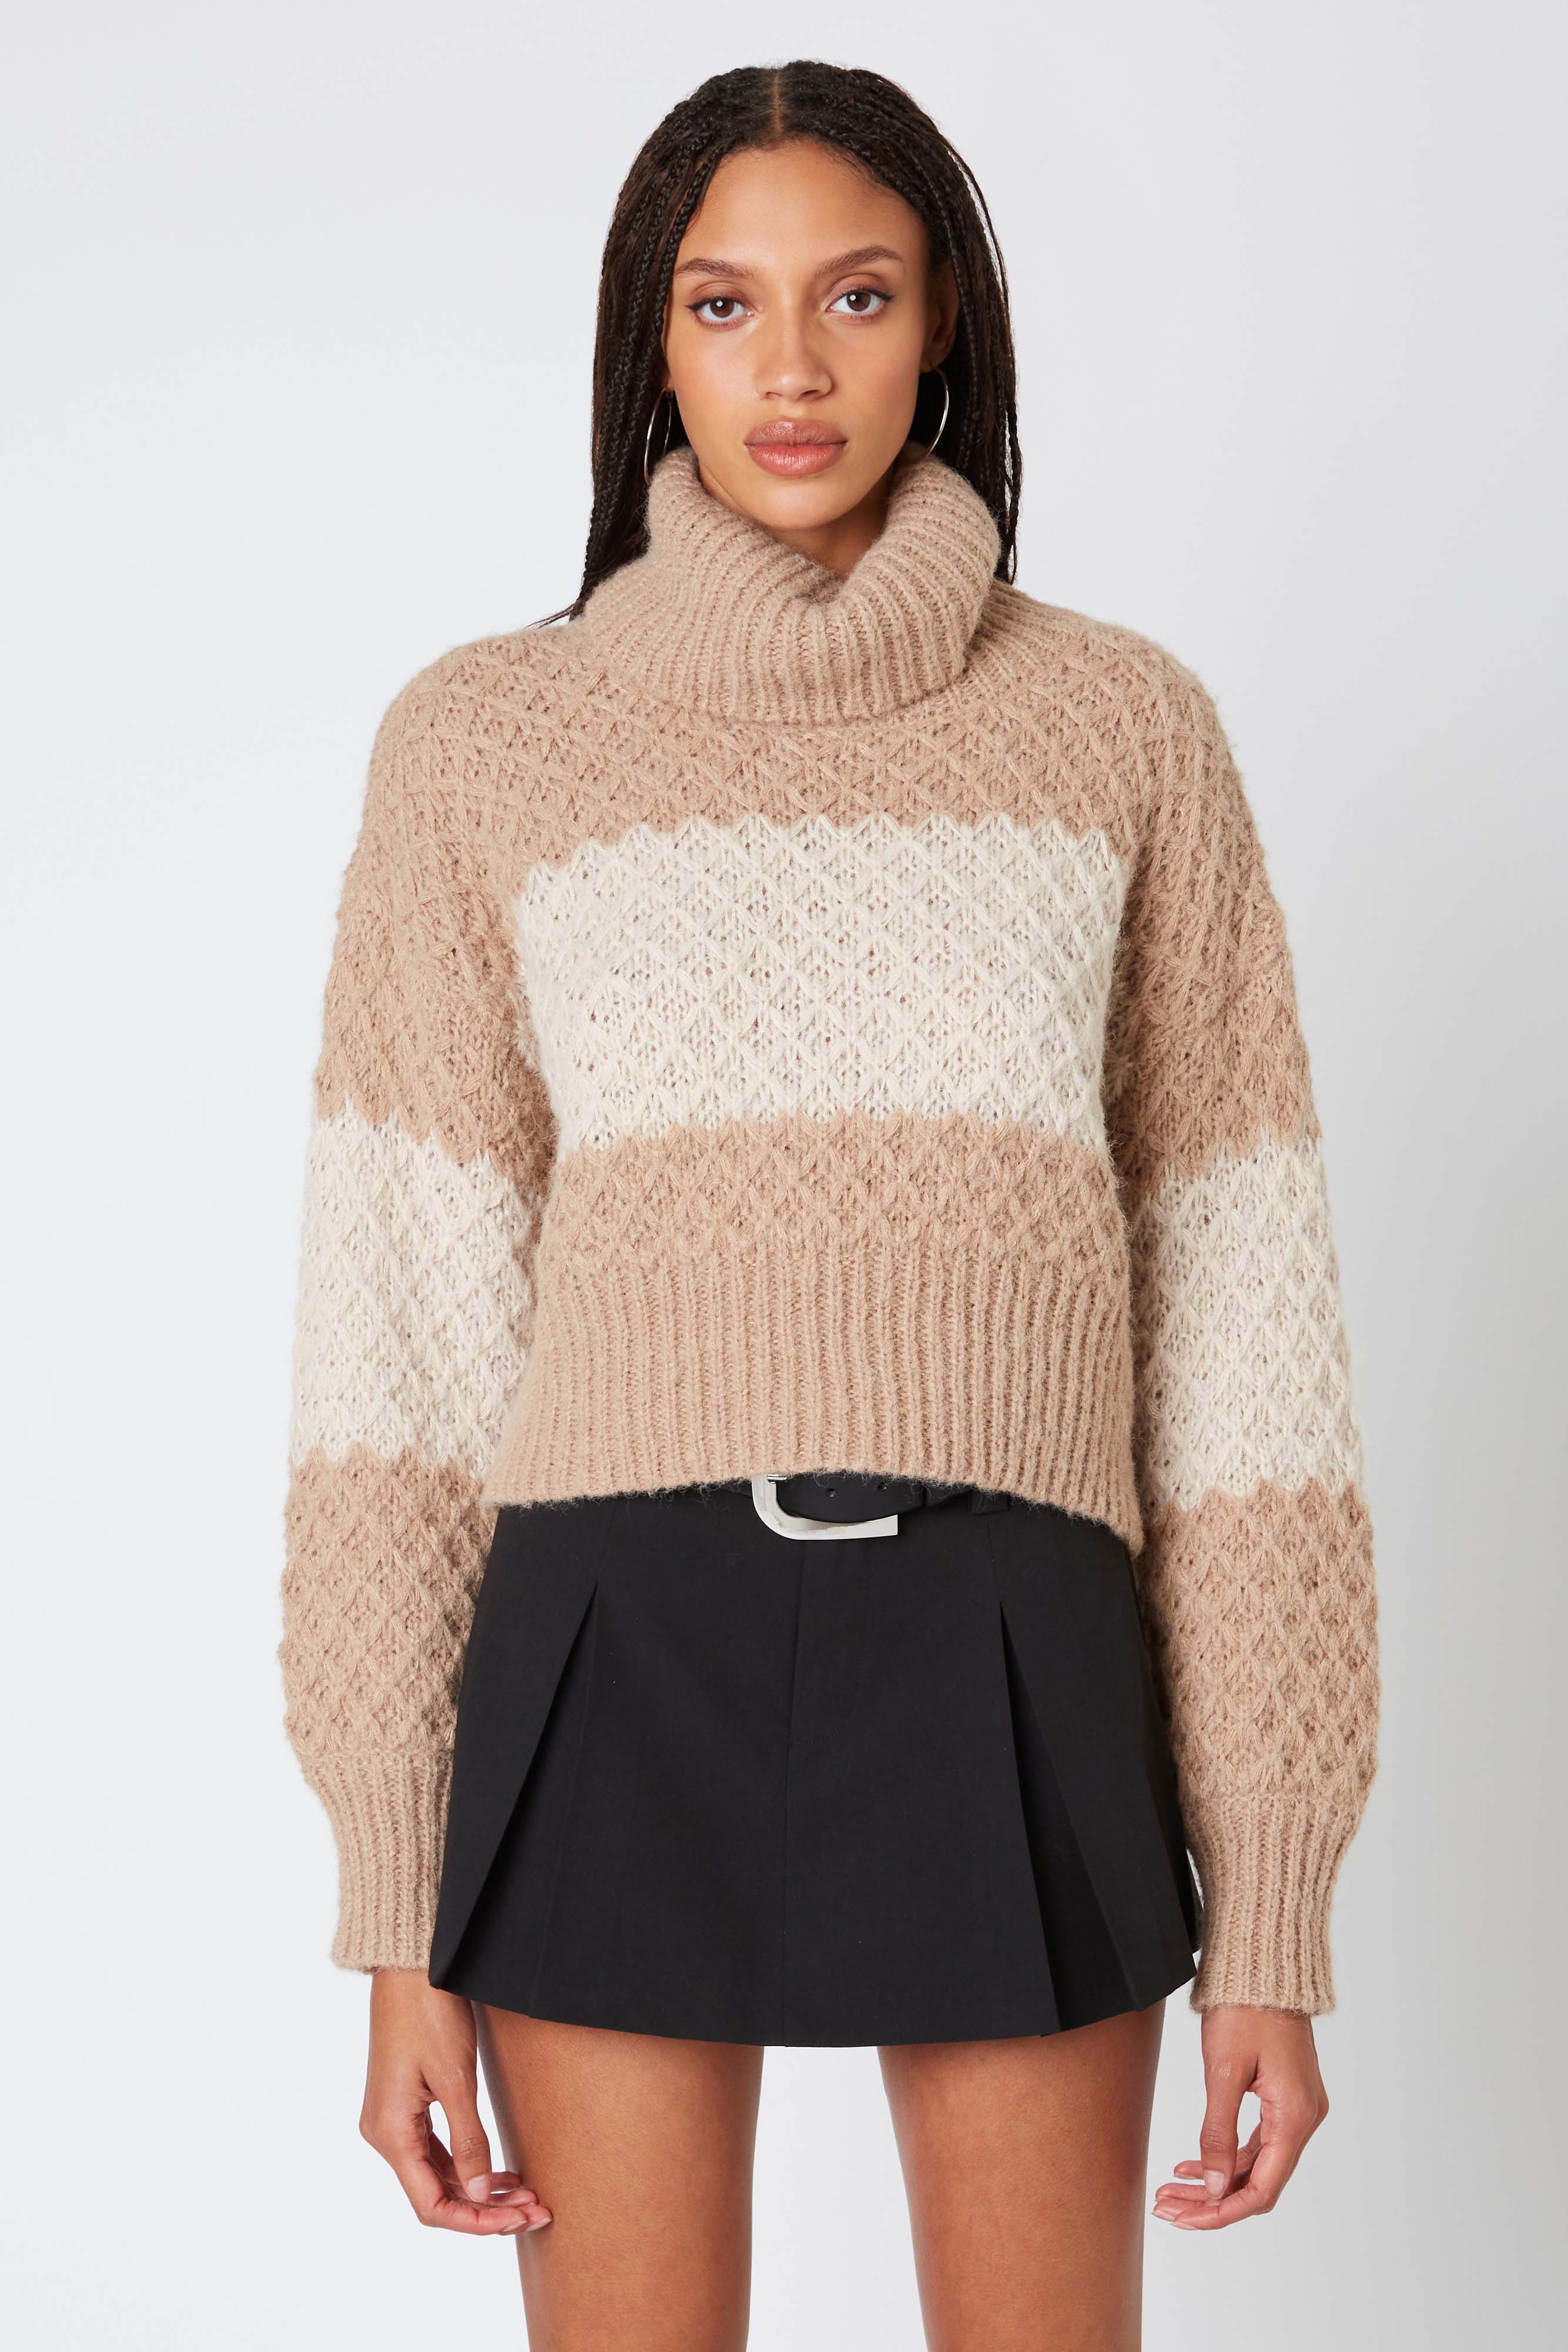 Turtleneck Pullover Sweater in Tan Front View